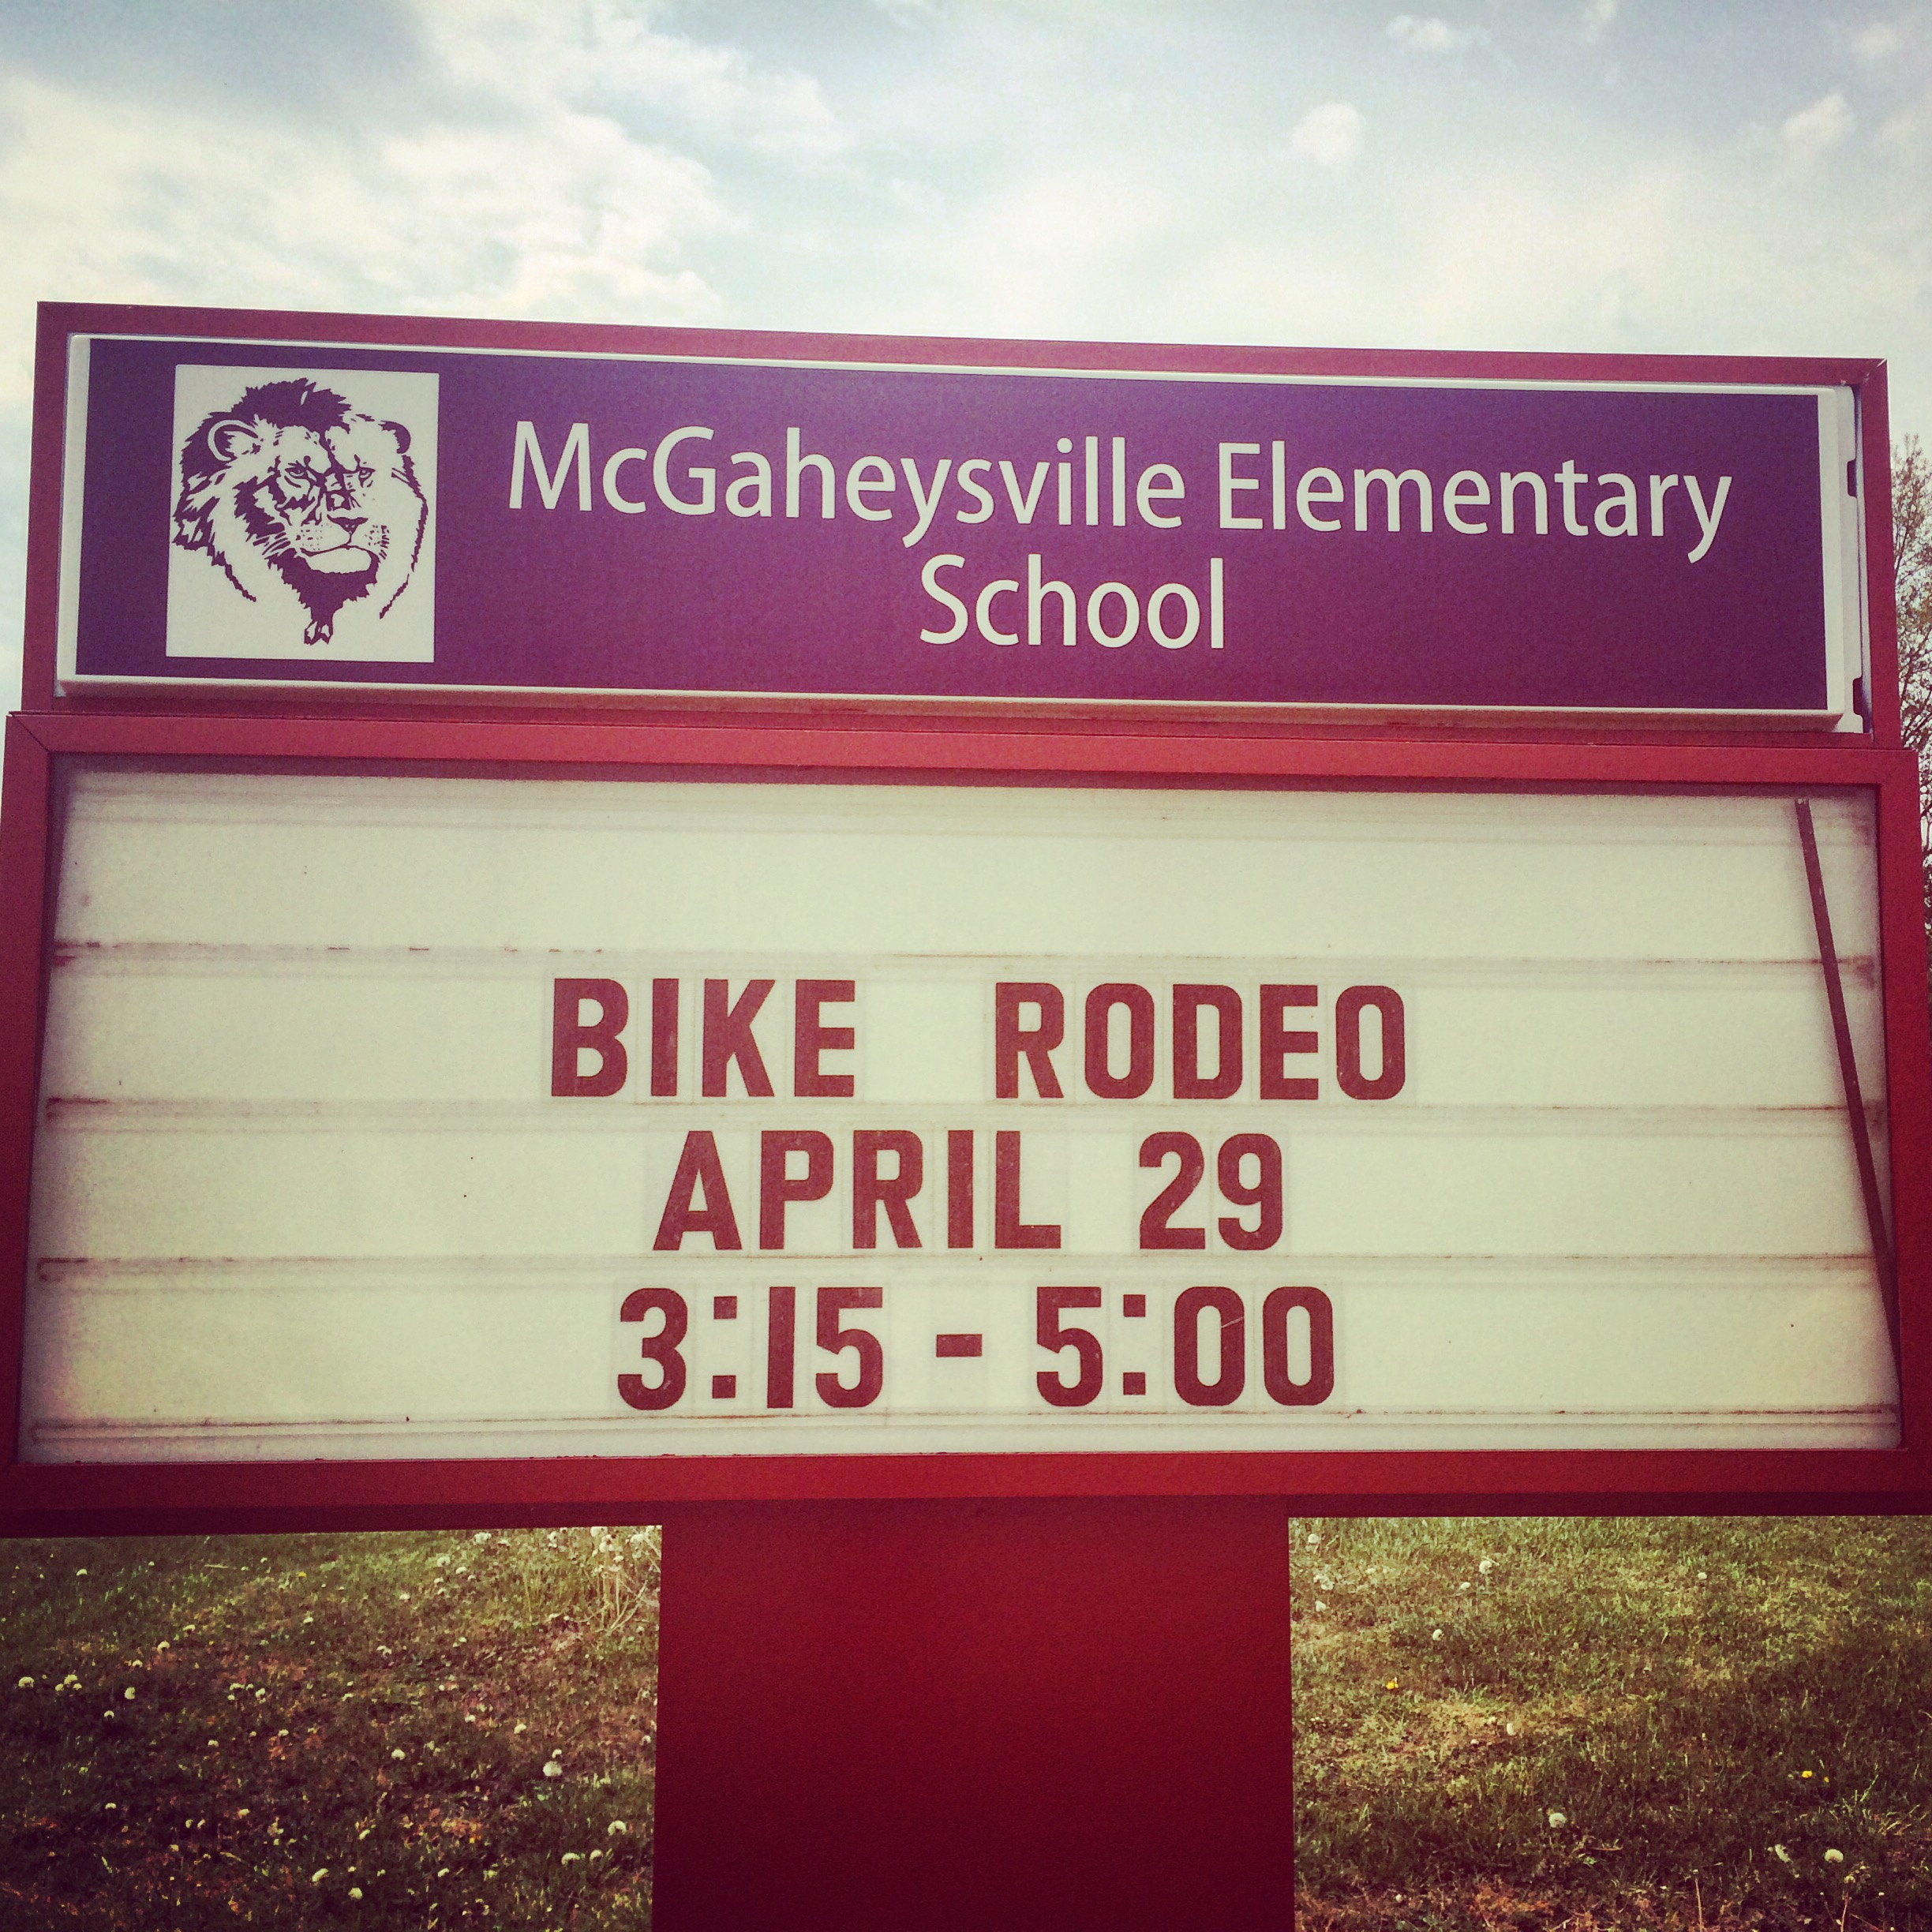 McGaheysville Elementary School is holding a bike rodeo! Want to help out?